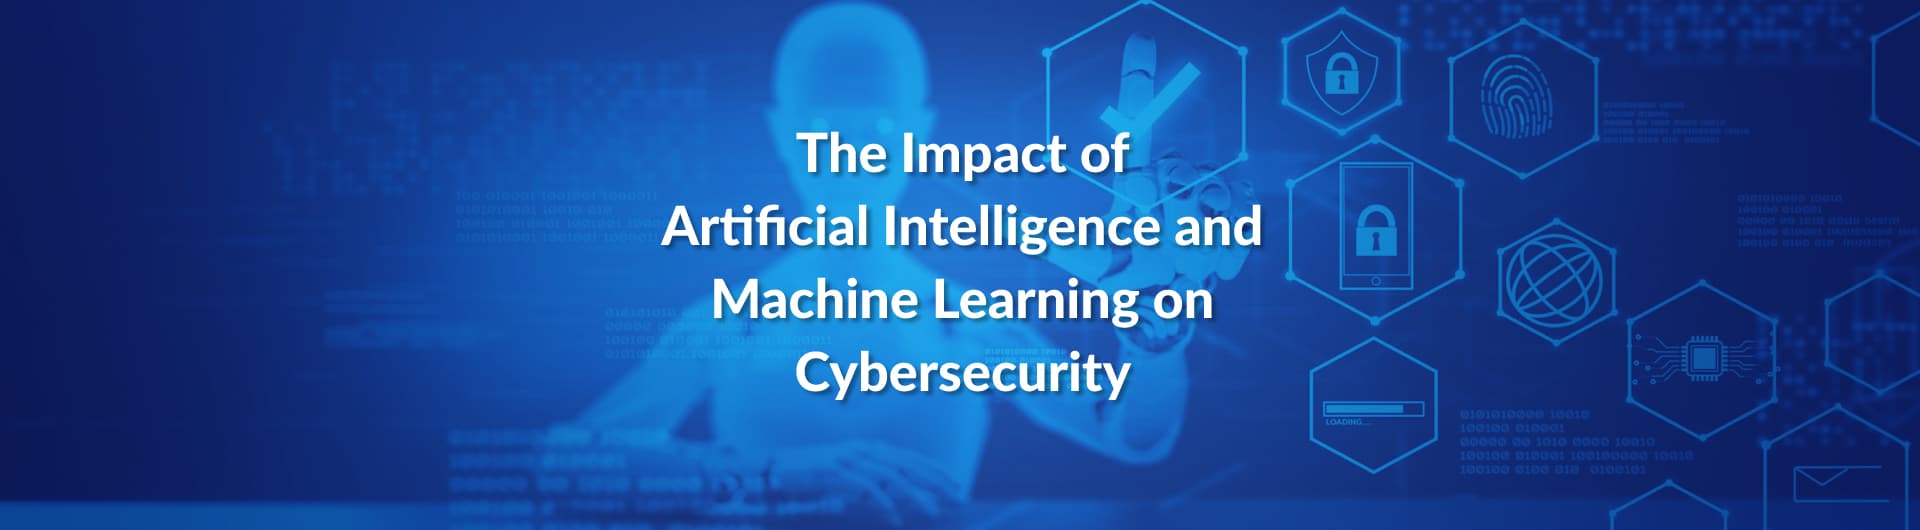 The Impact of Artificial Intelligence and Machine Learning on Cybersecurity